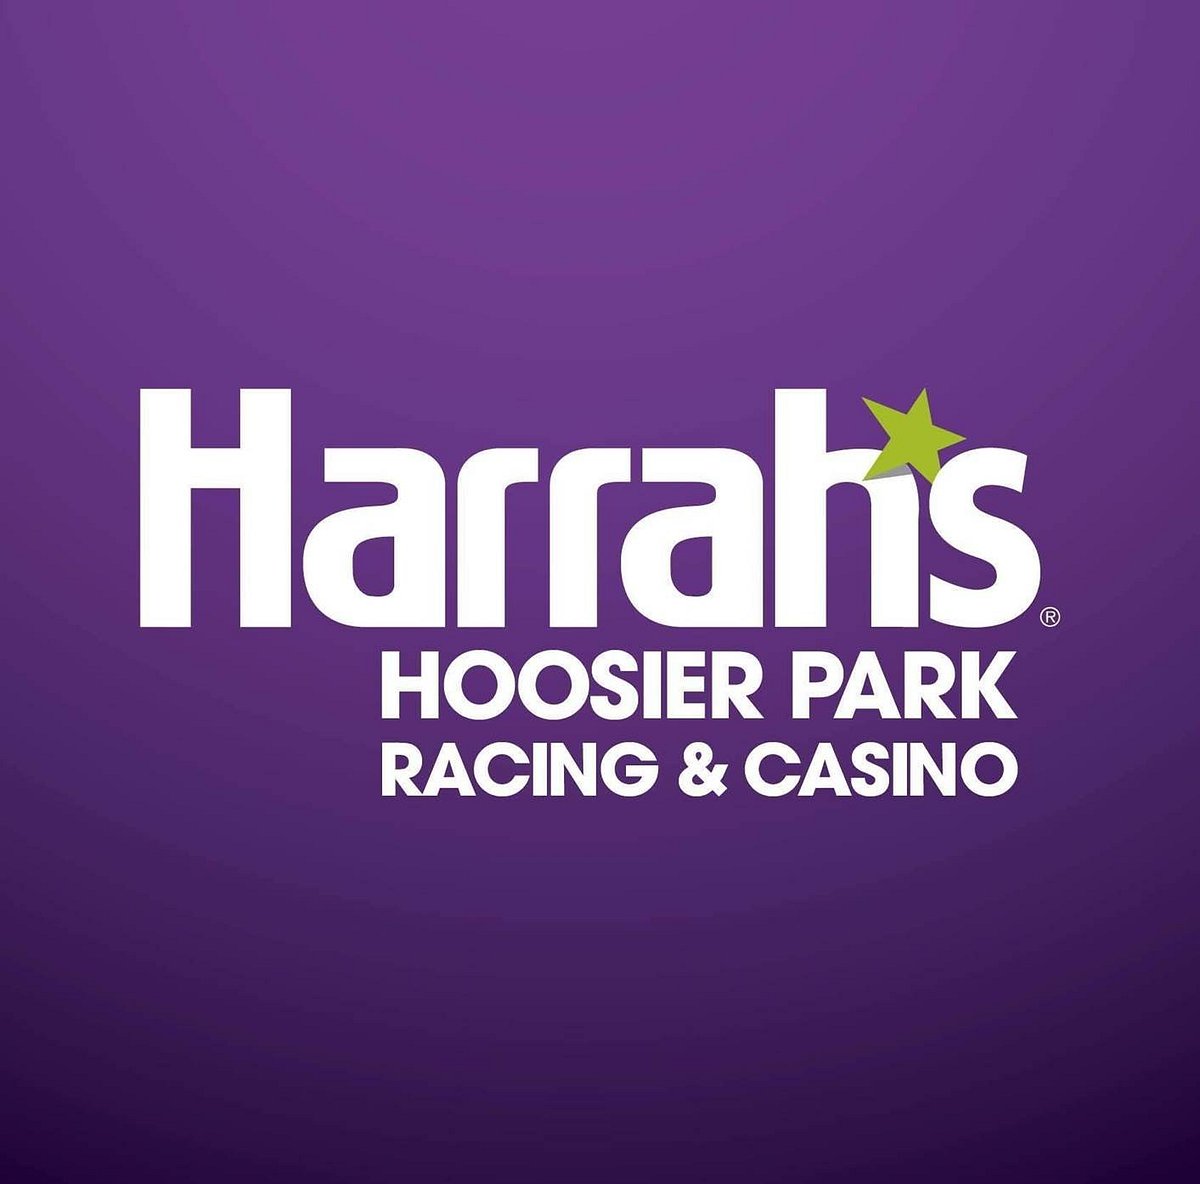 Harrah's Hoosier Park Racing & Casino (Anderson) - All You Need to Know